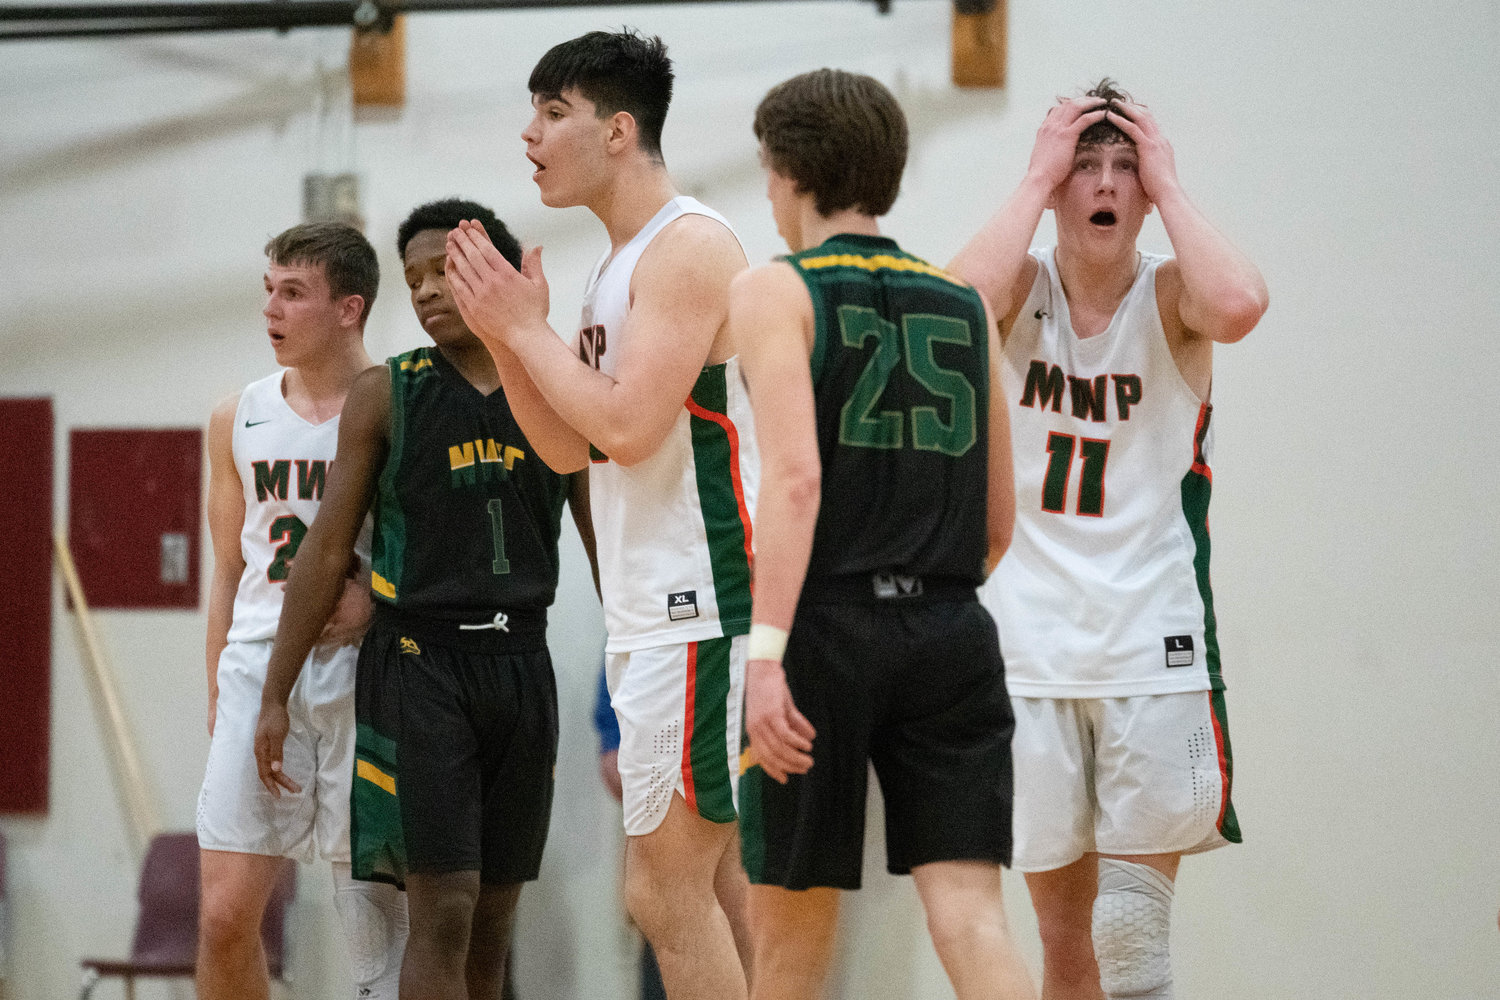 Josh Salguero and Hunter Hazen have a tough time believing a call during the second half of MWP's win over Northwest Christian in the 2B state tournament's opening round, at Chehalis on Feb. 25.